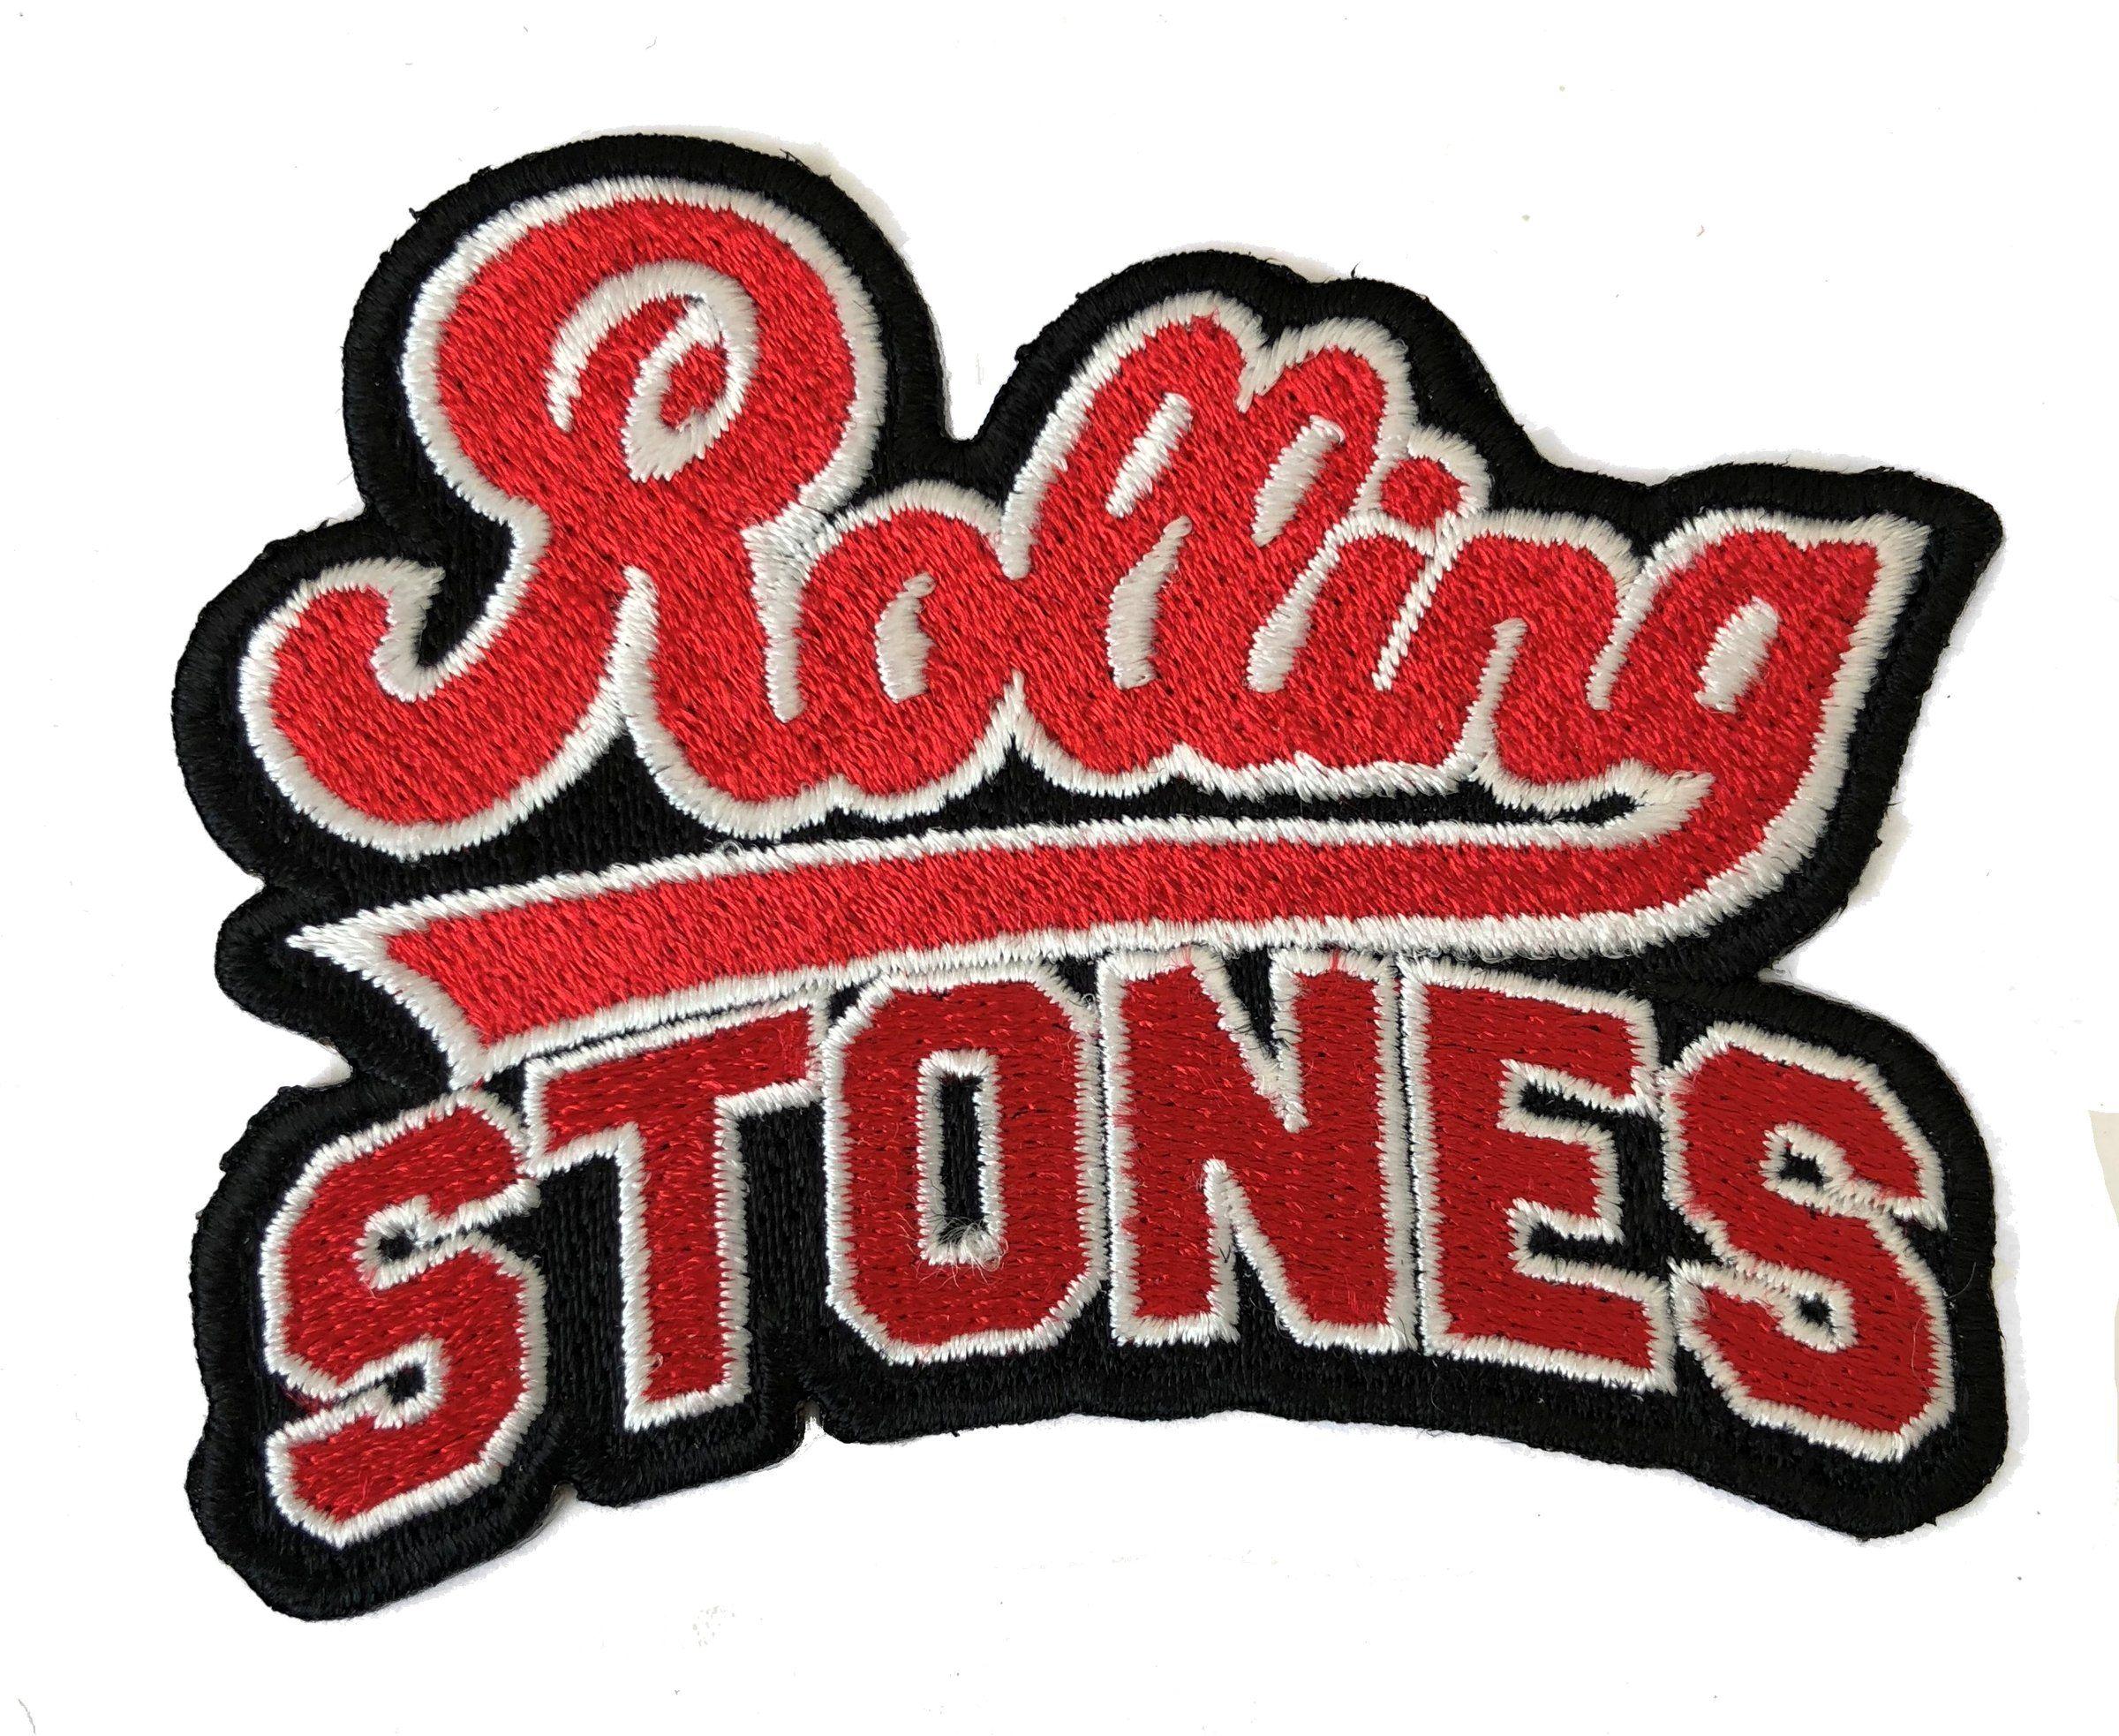 Rolling Stones Official Logo - Rolling Stones Team Logo Patch Official Iron-On-Woven Patch Brand ...